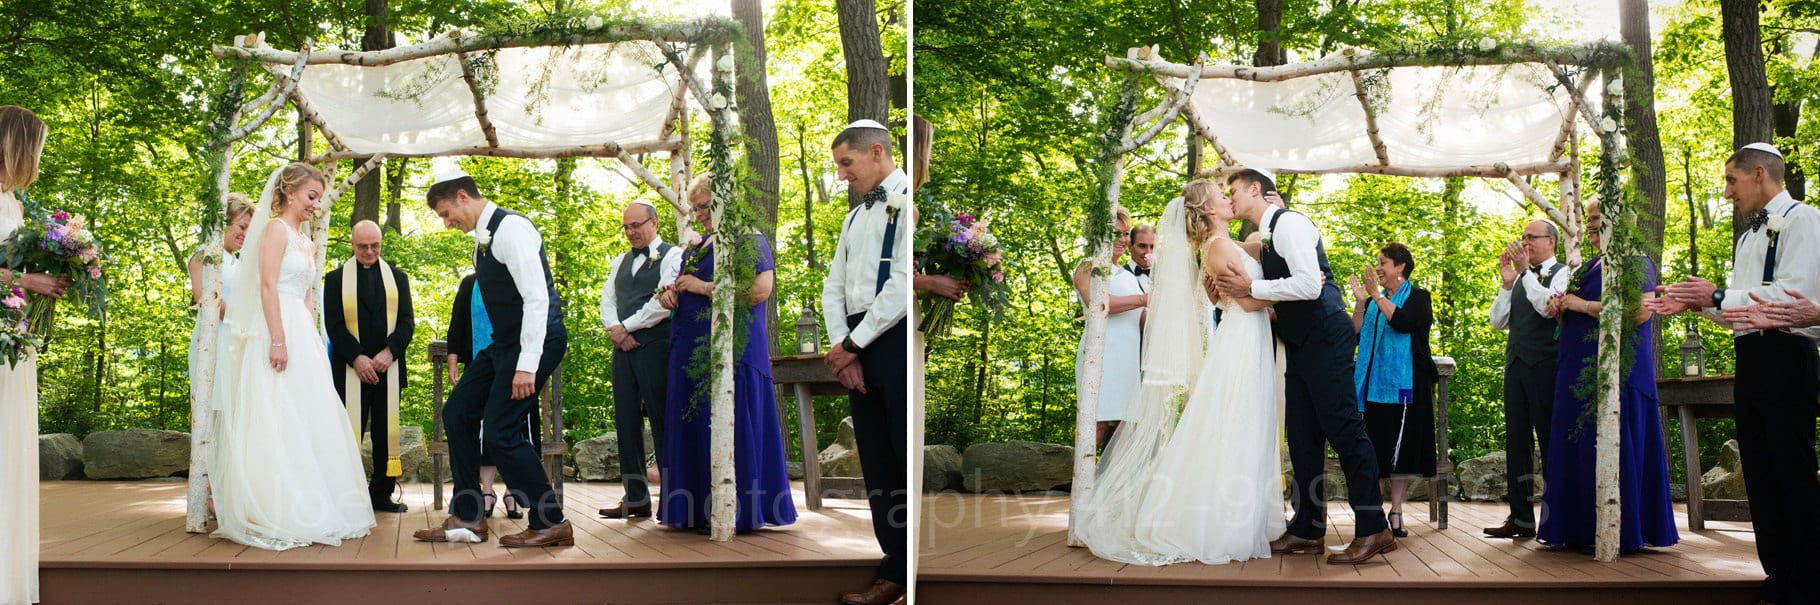 A groom stomps on a glass and then kisses his bride as they stand beneath a chuppah during their Seven Springs Wedding.